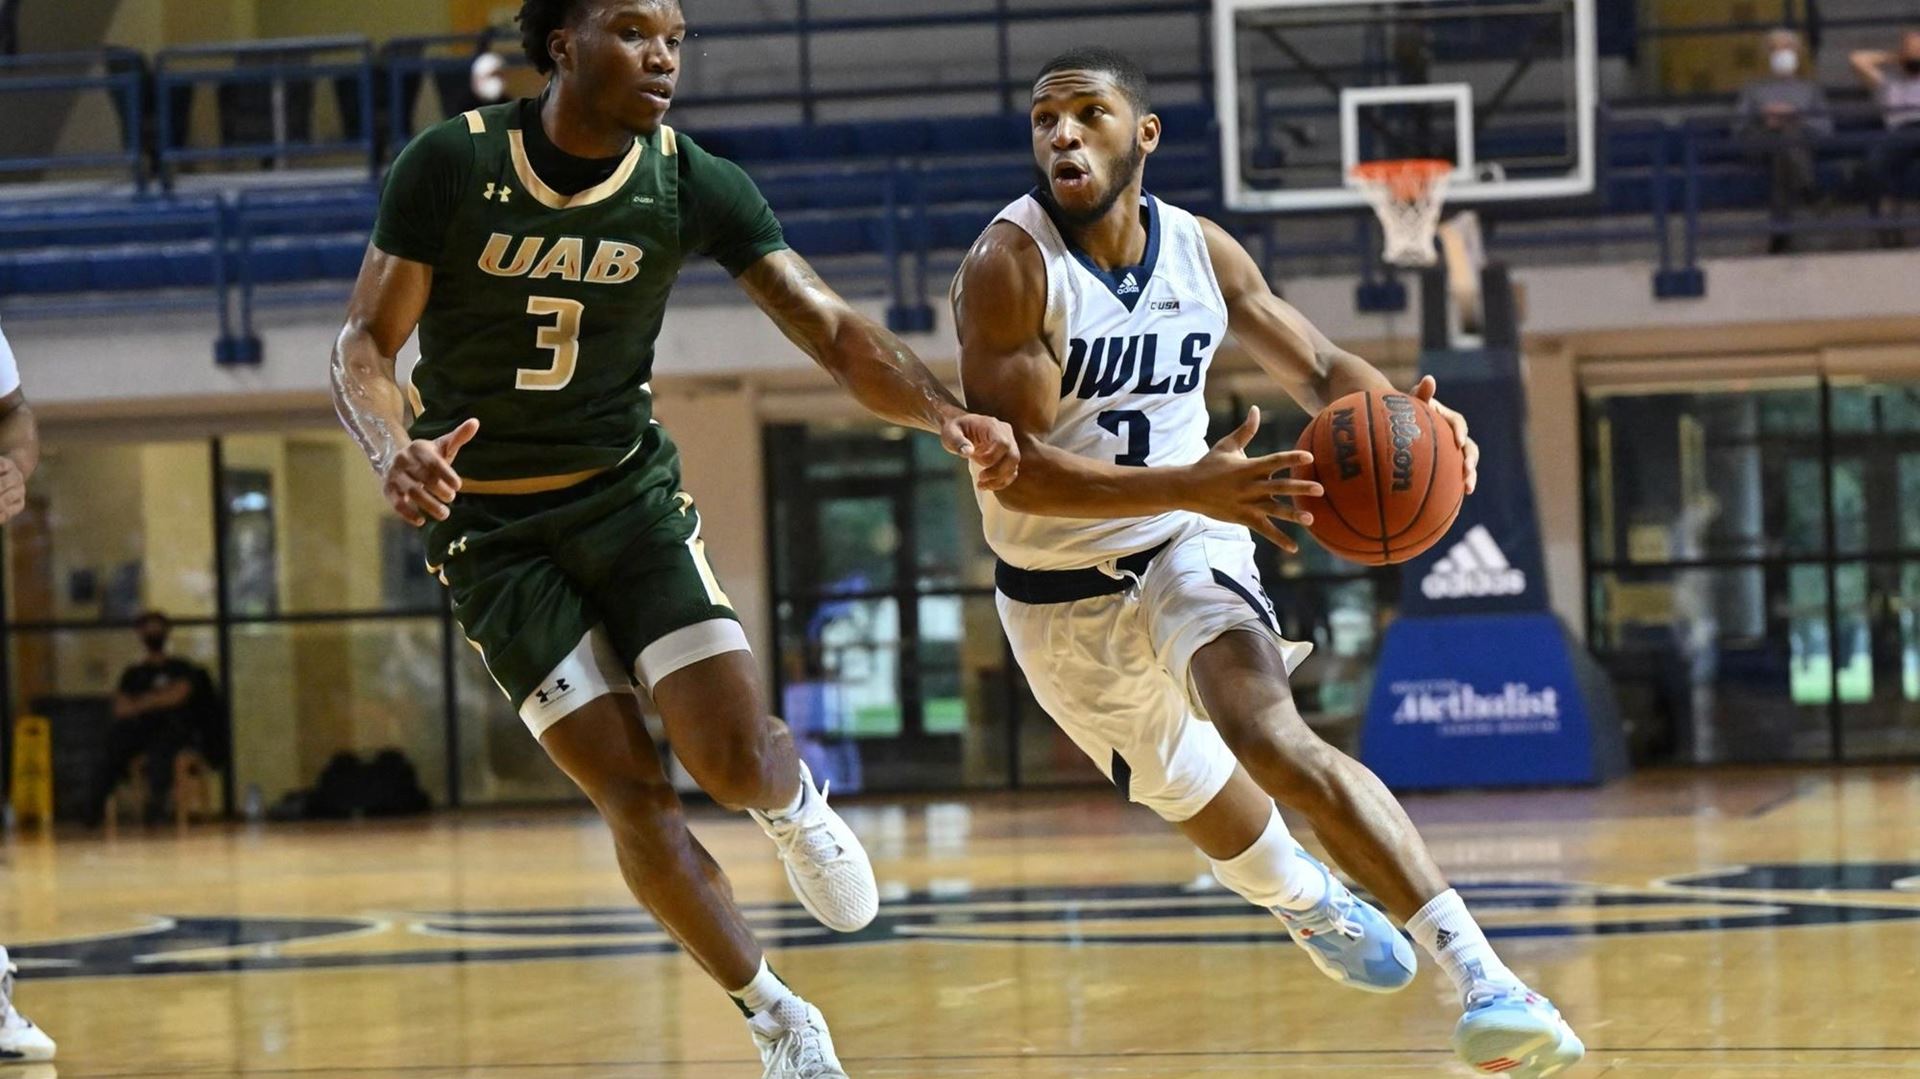 Rice's Travis Evee scored 25 points to lead the Owls past UAB Jan. 8. (Photo by Maria Lysaker/Rice Athletics)